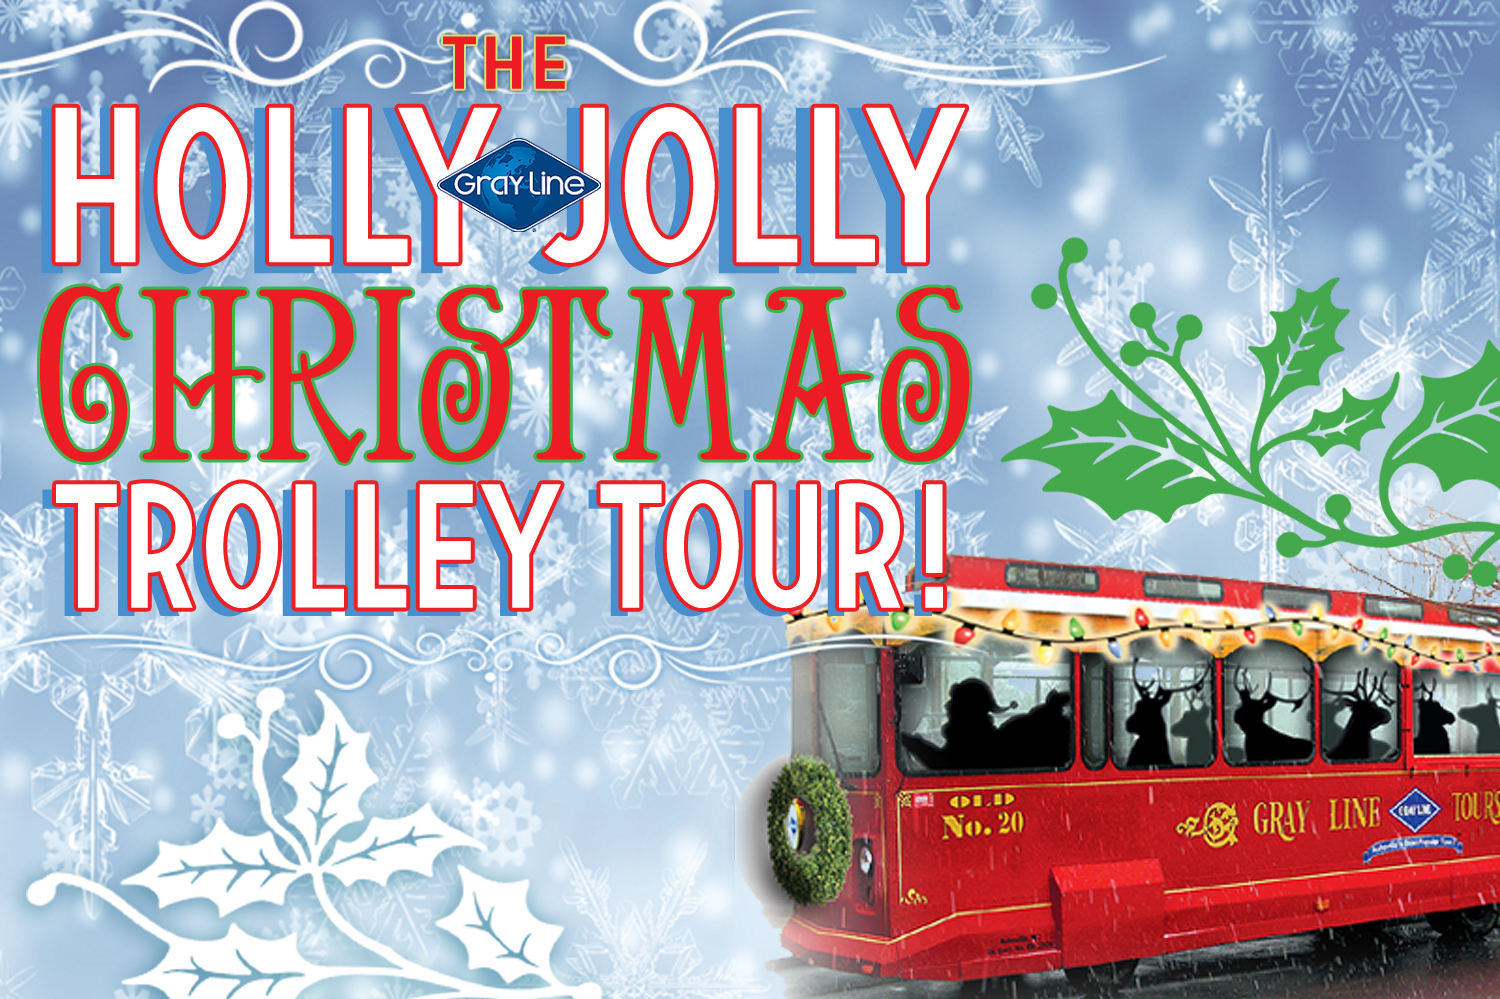 Gray Line set to begin new Holly Jolly Christmas Trolley Tour